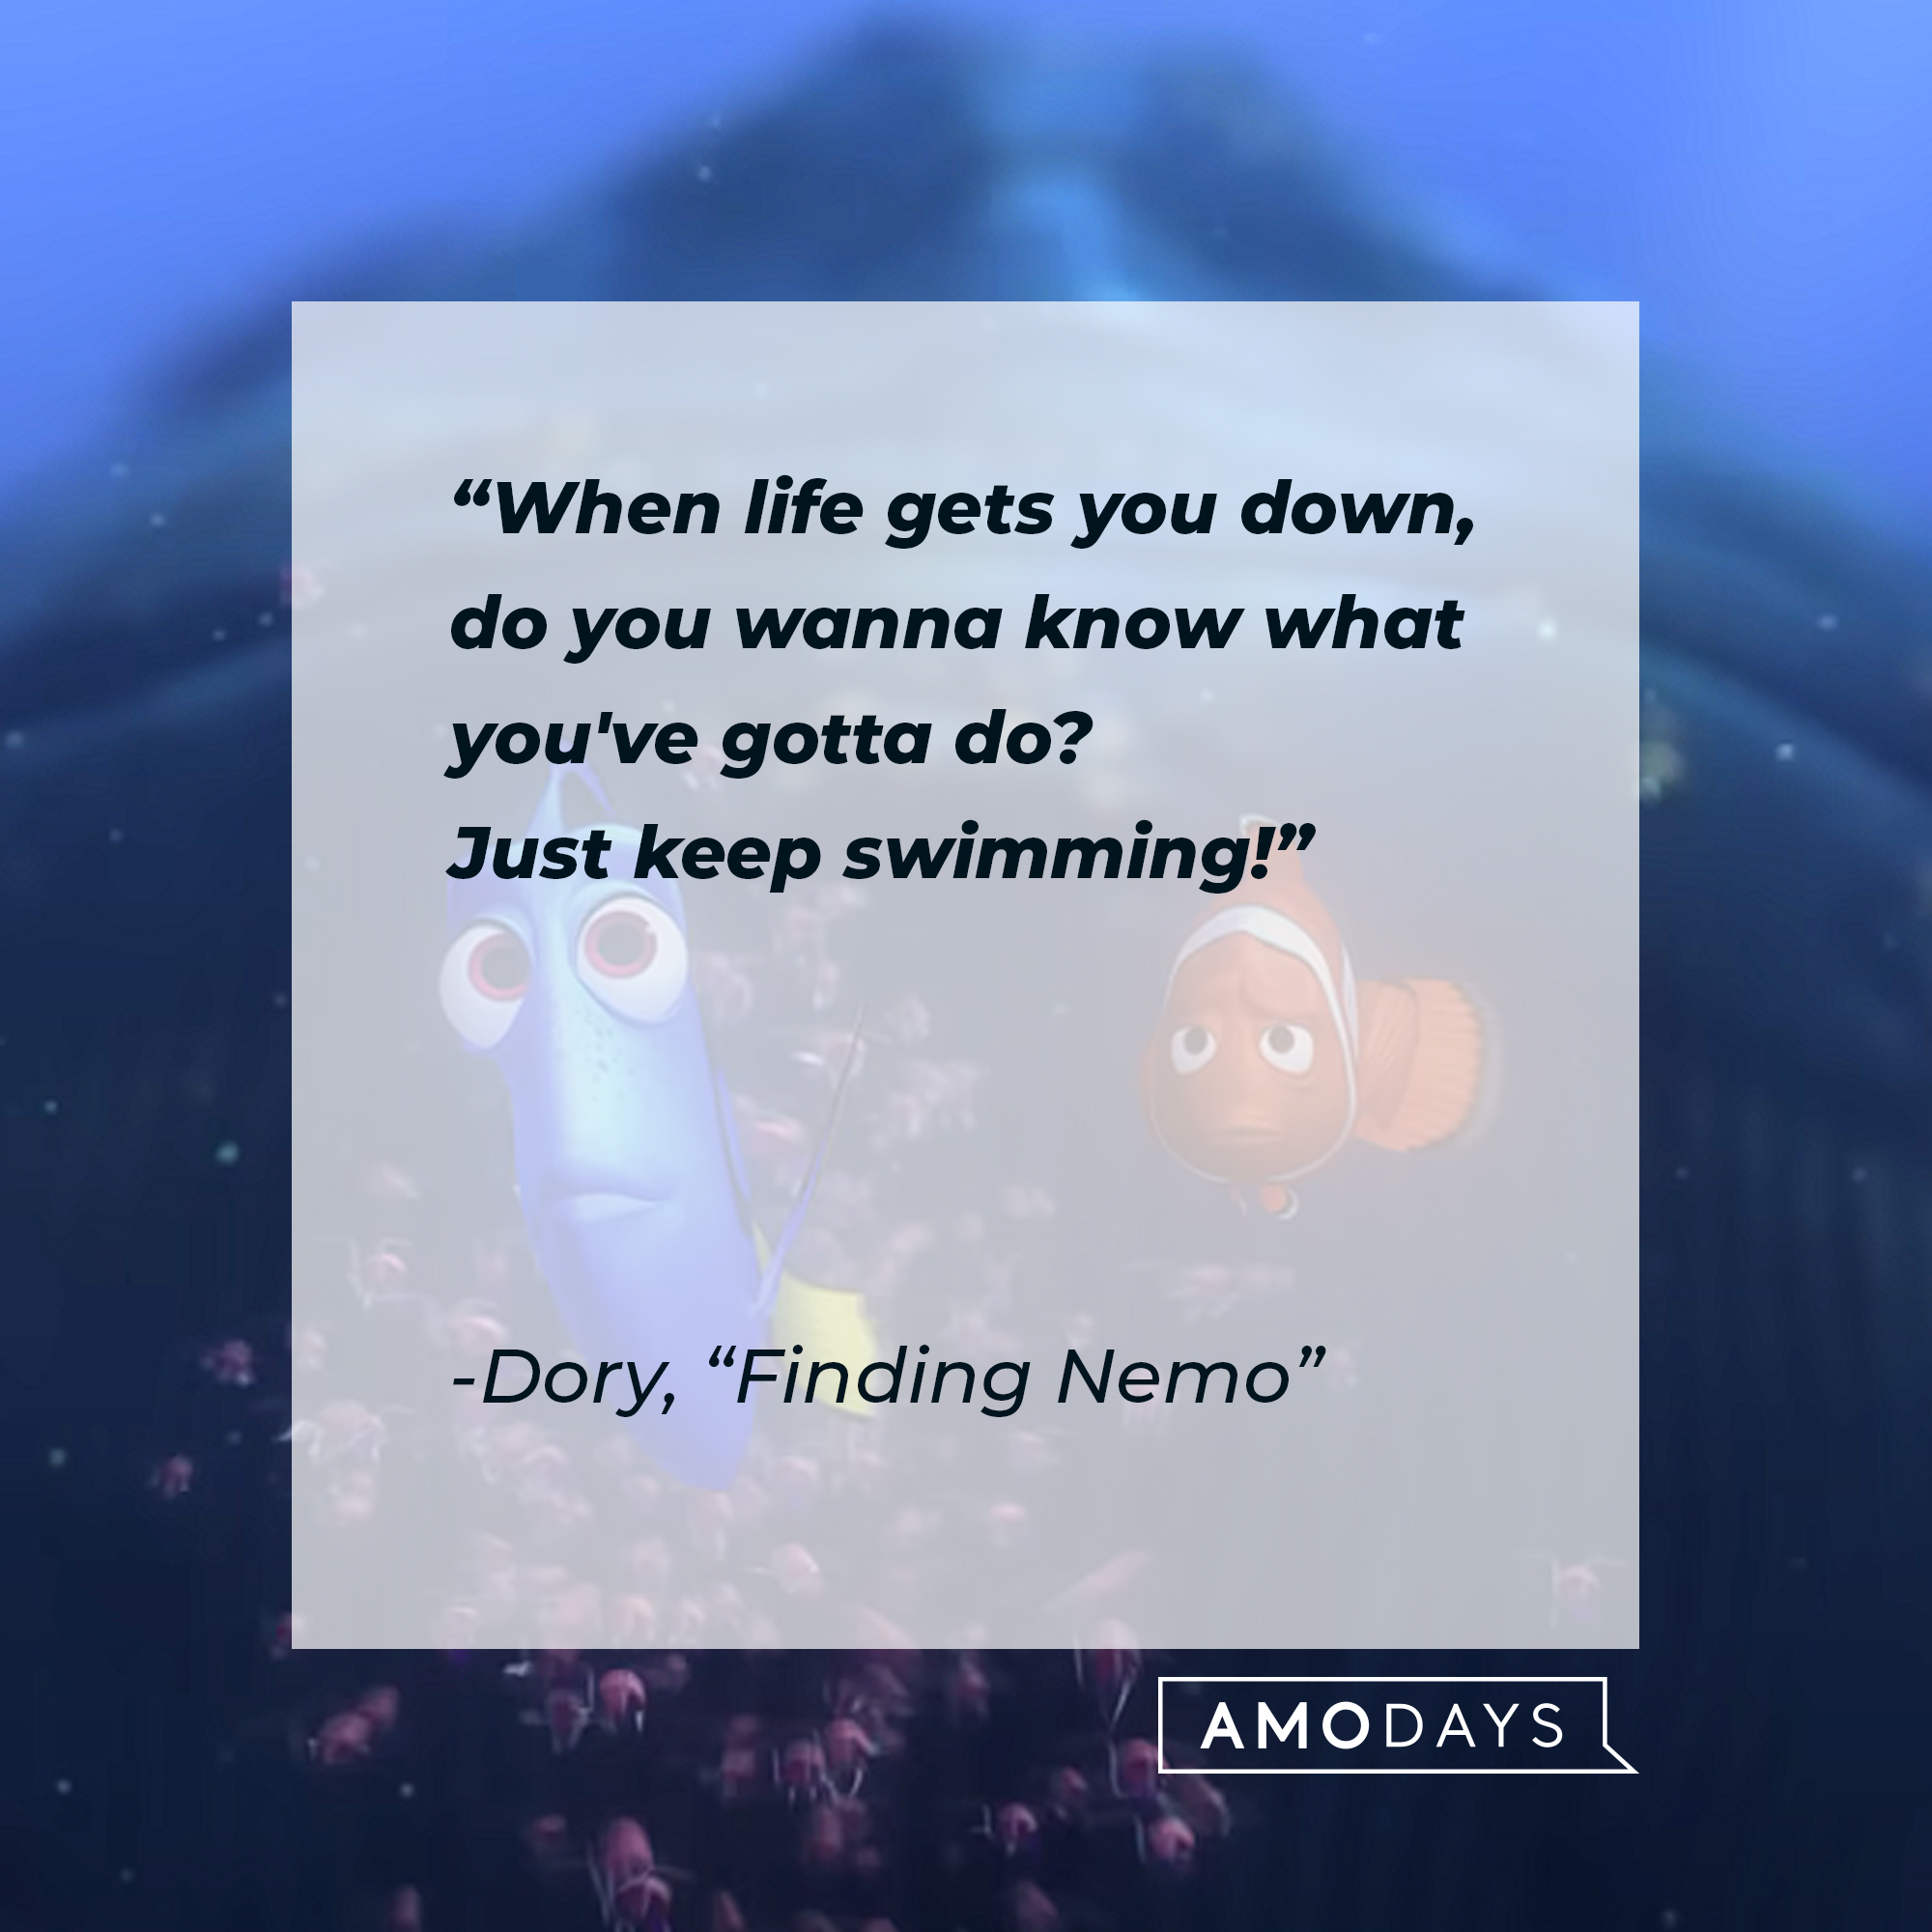 Dory's "Finding Nemo" quote: "When life gets you down, do you wanna know what you've gotta do? Just keep swimming!" | Source: Youtube.com/pixar